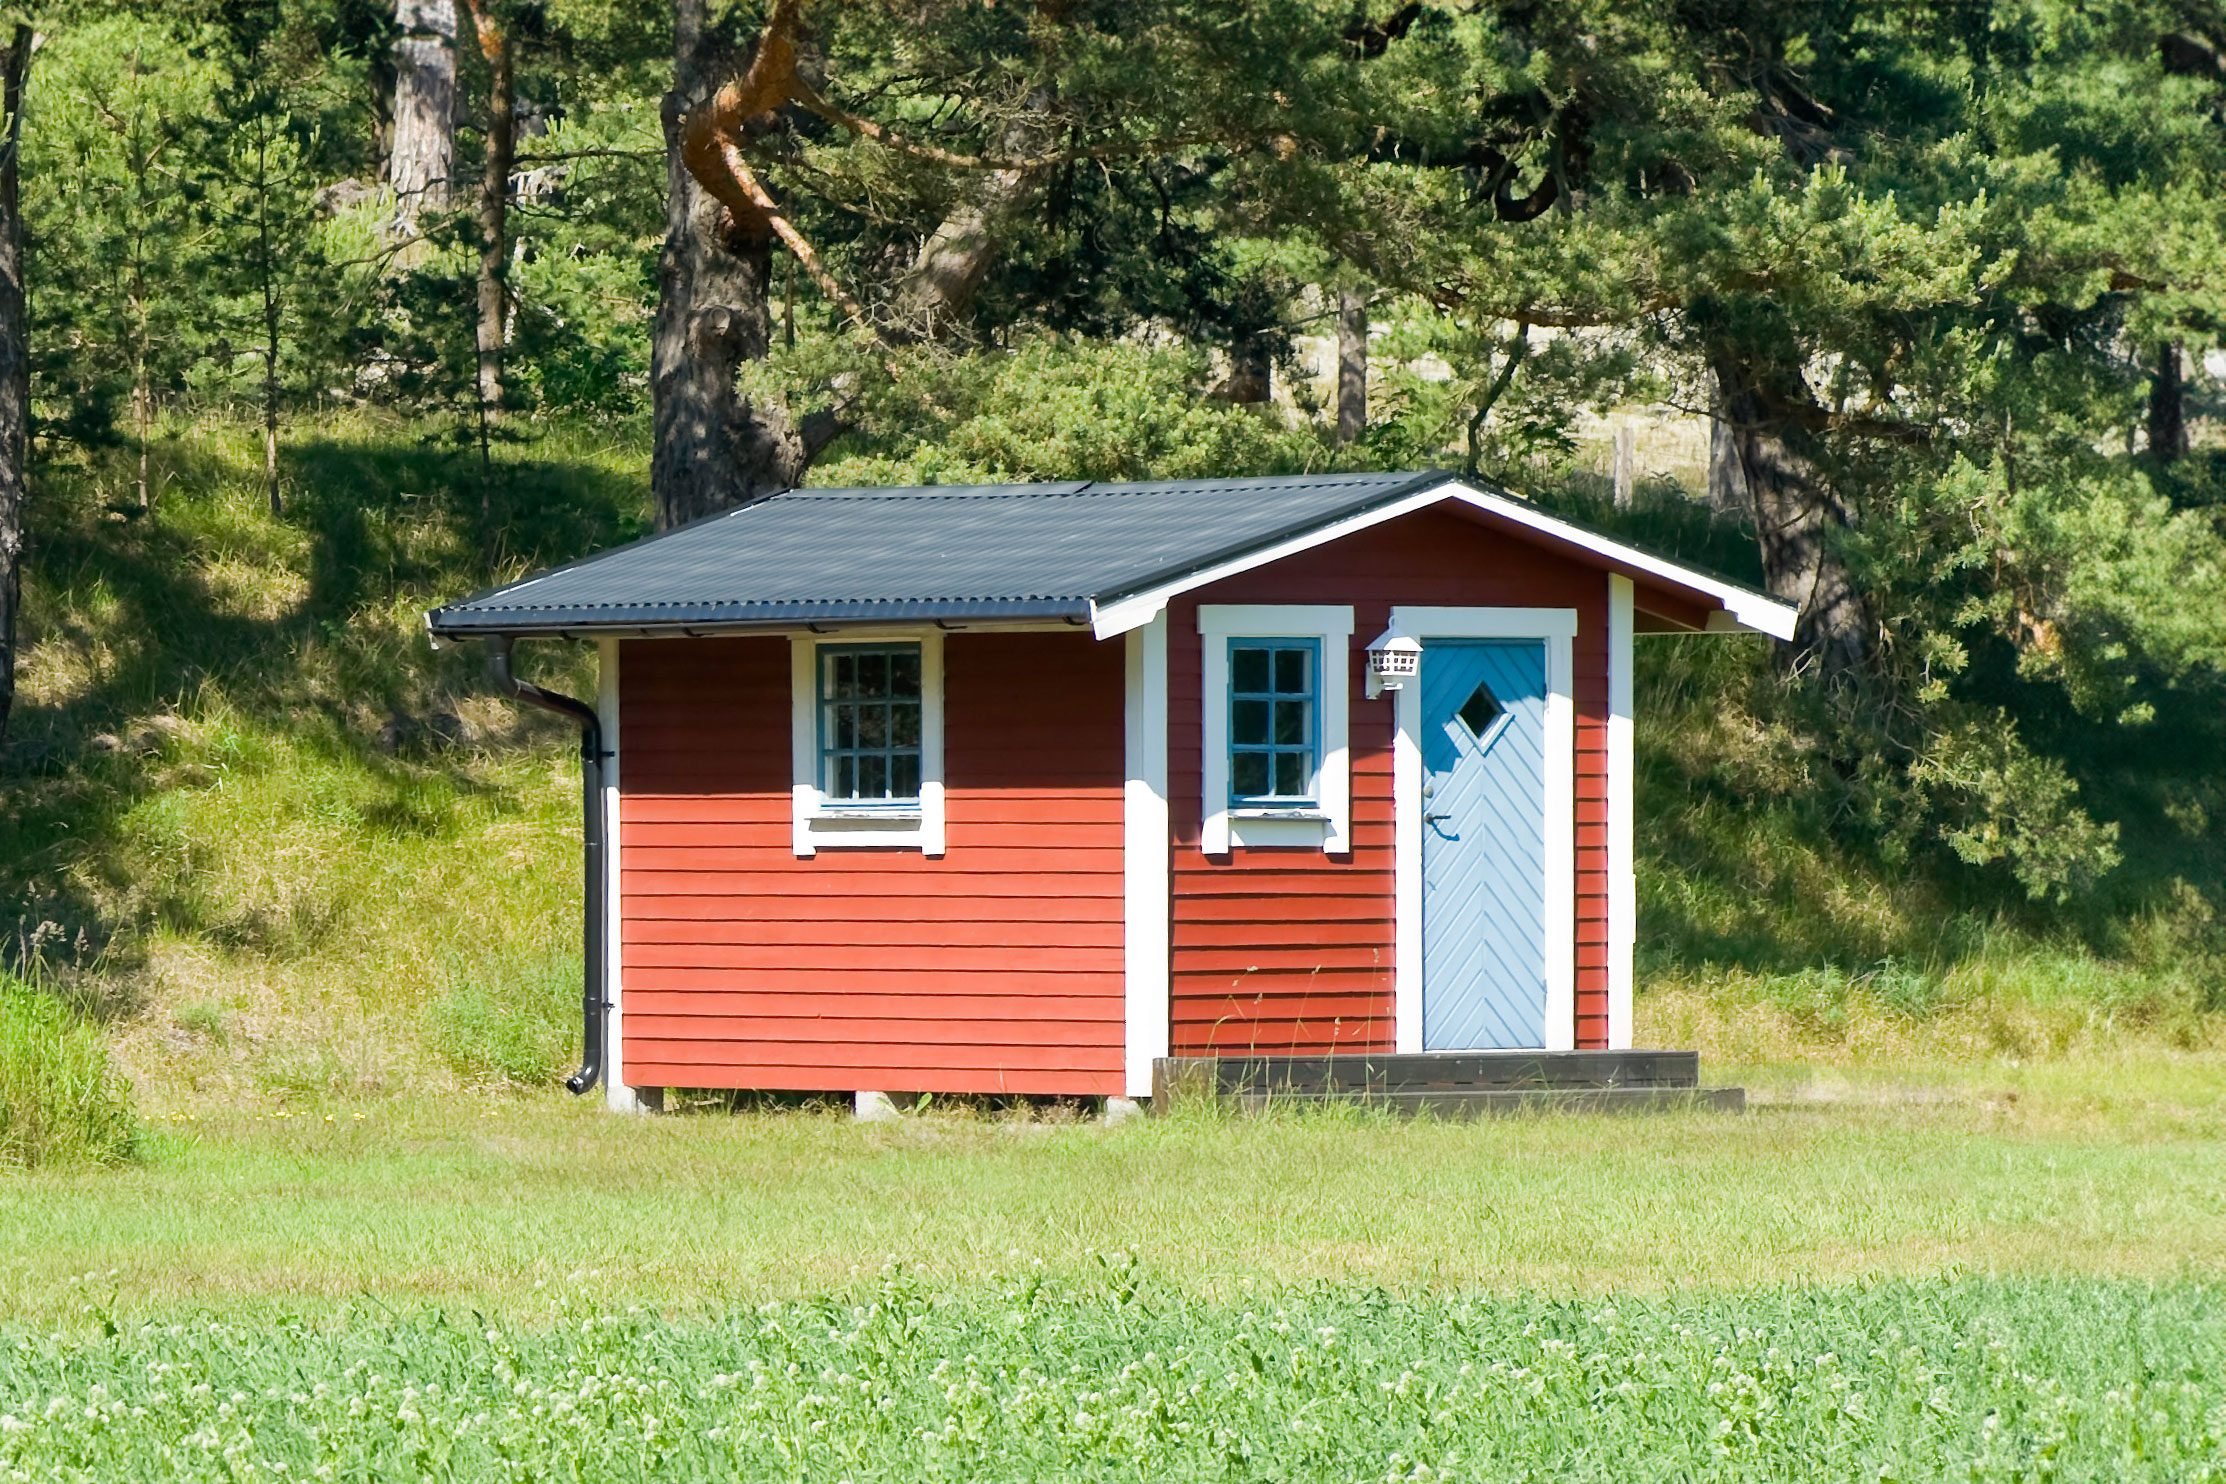 Can You Turn a Shed Into a Tiny Home? Here's What to Know